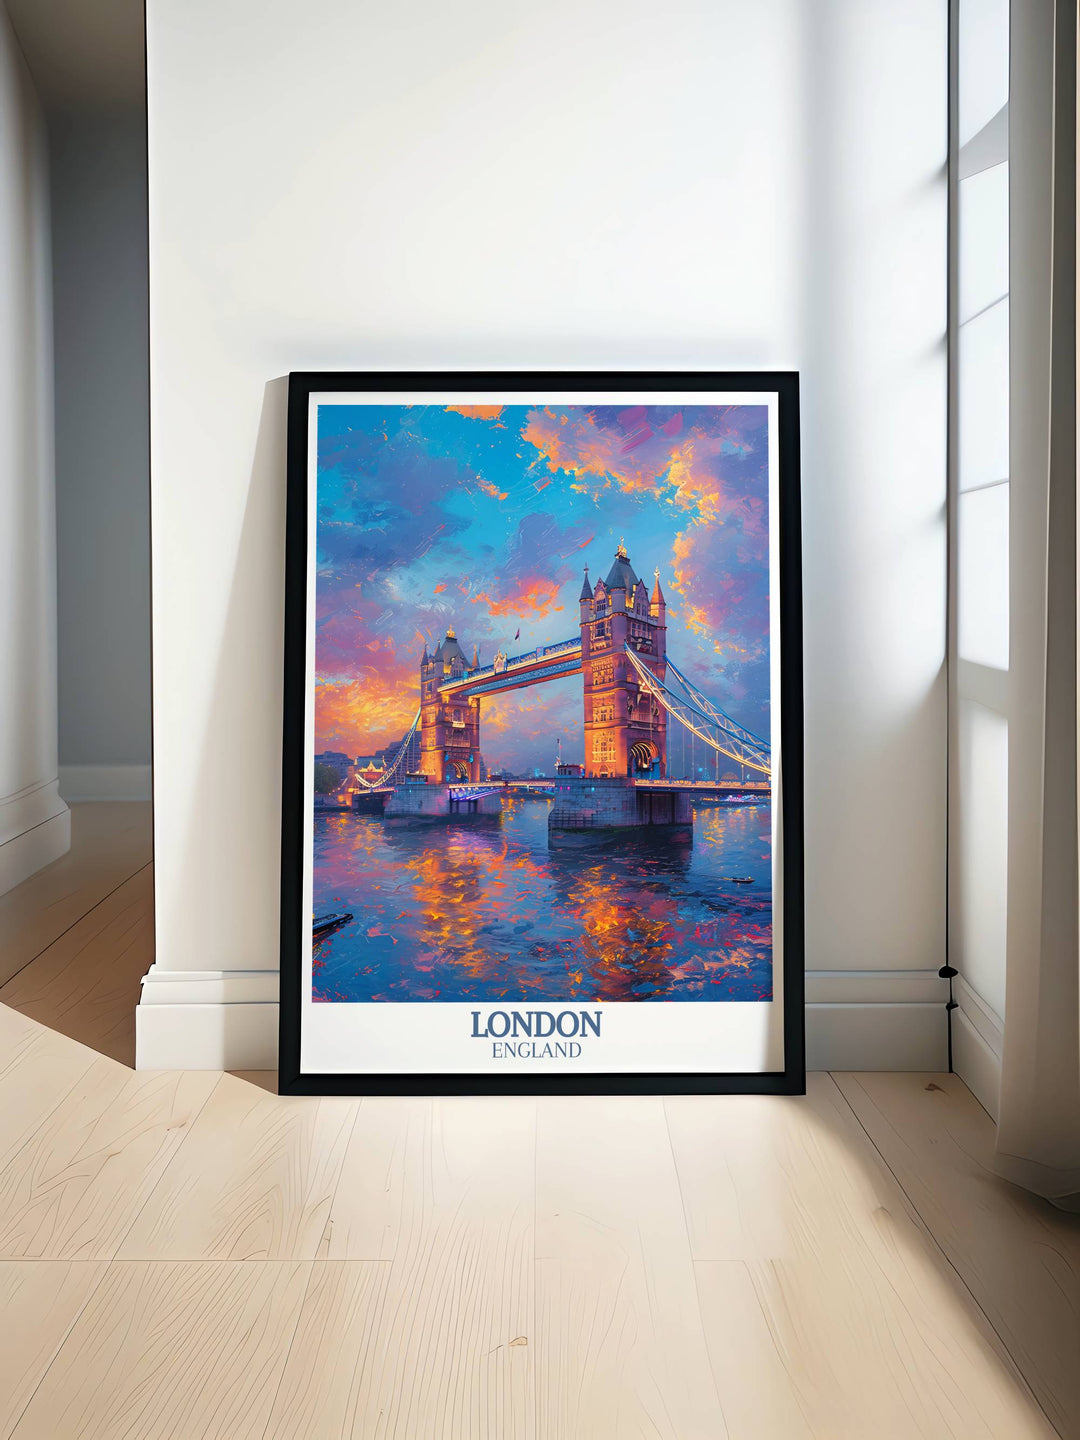 Custom print of London scenes, focusing on Tower Bridge and its surrounding areas, tailored for personal tastes.